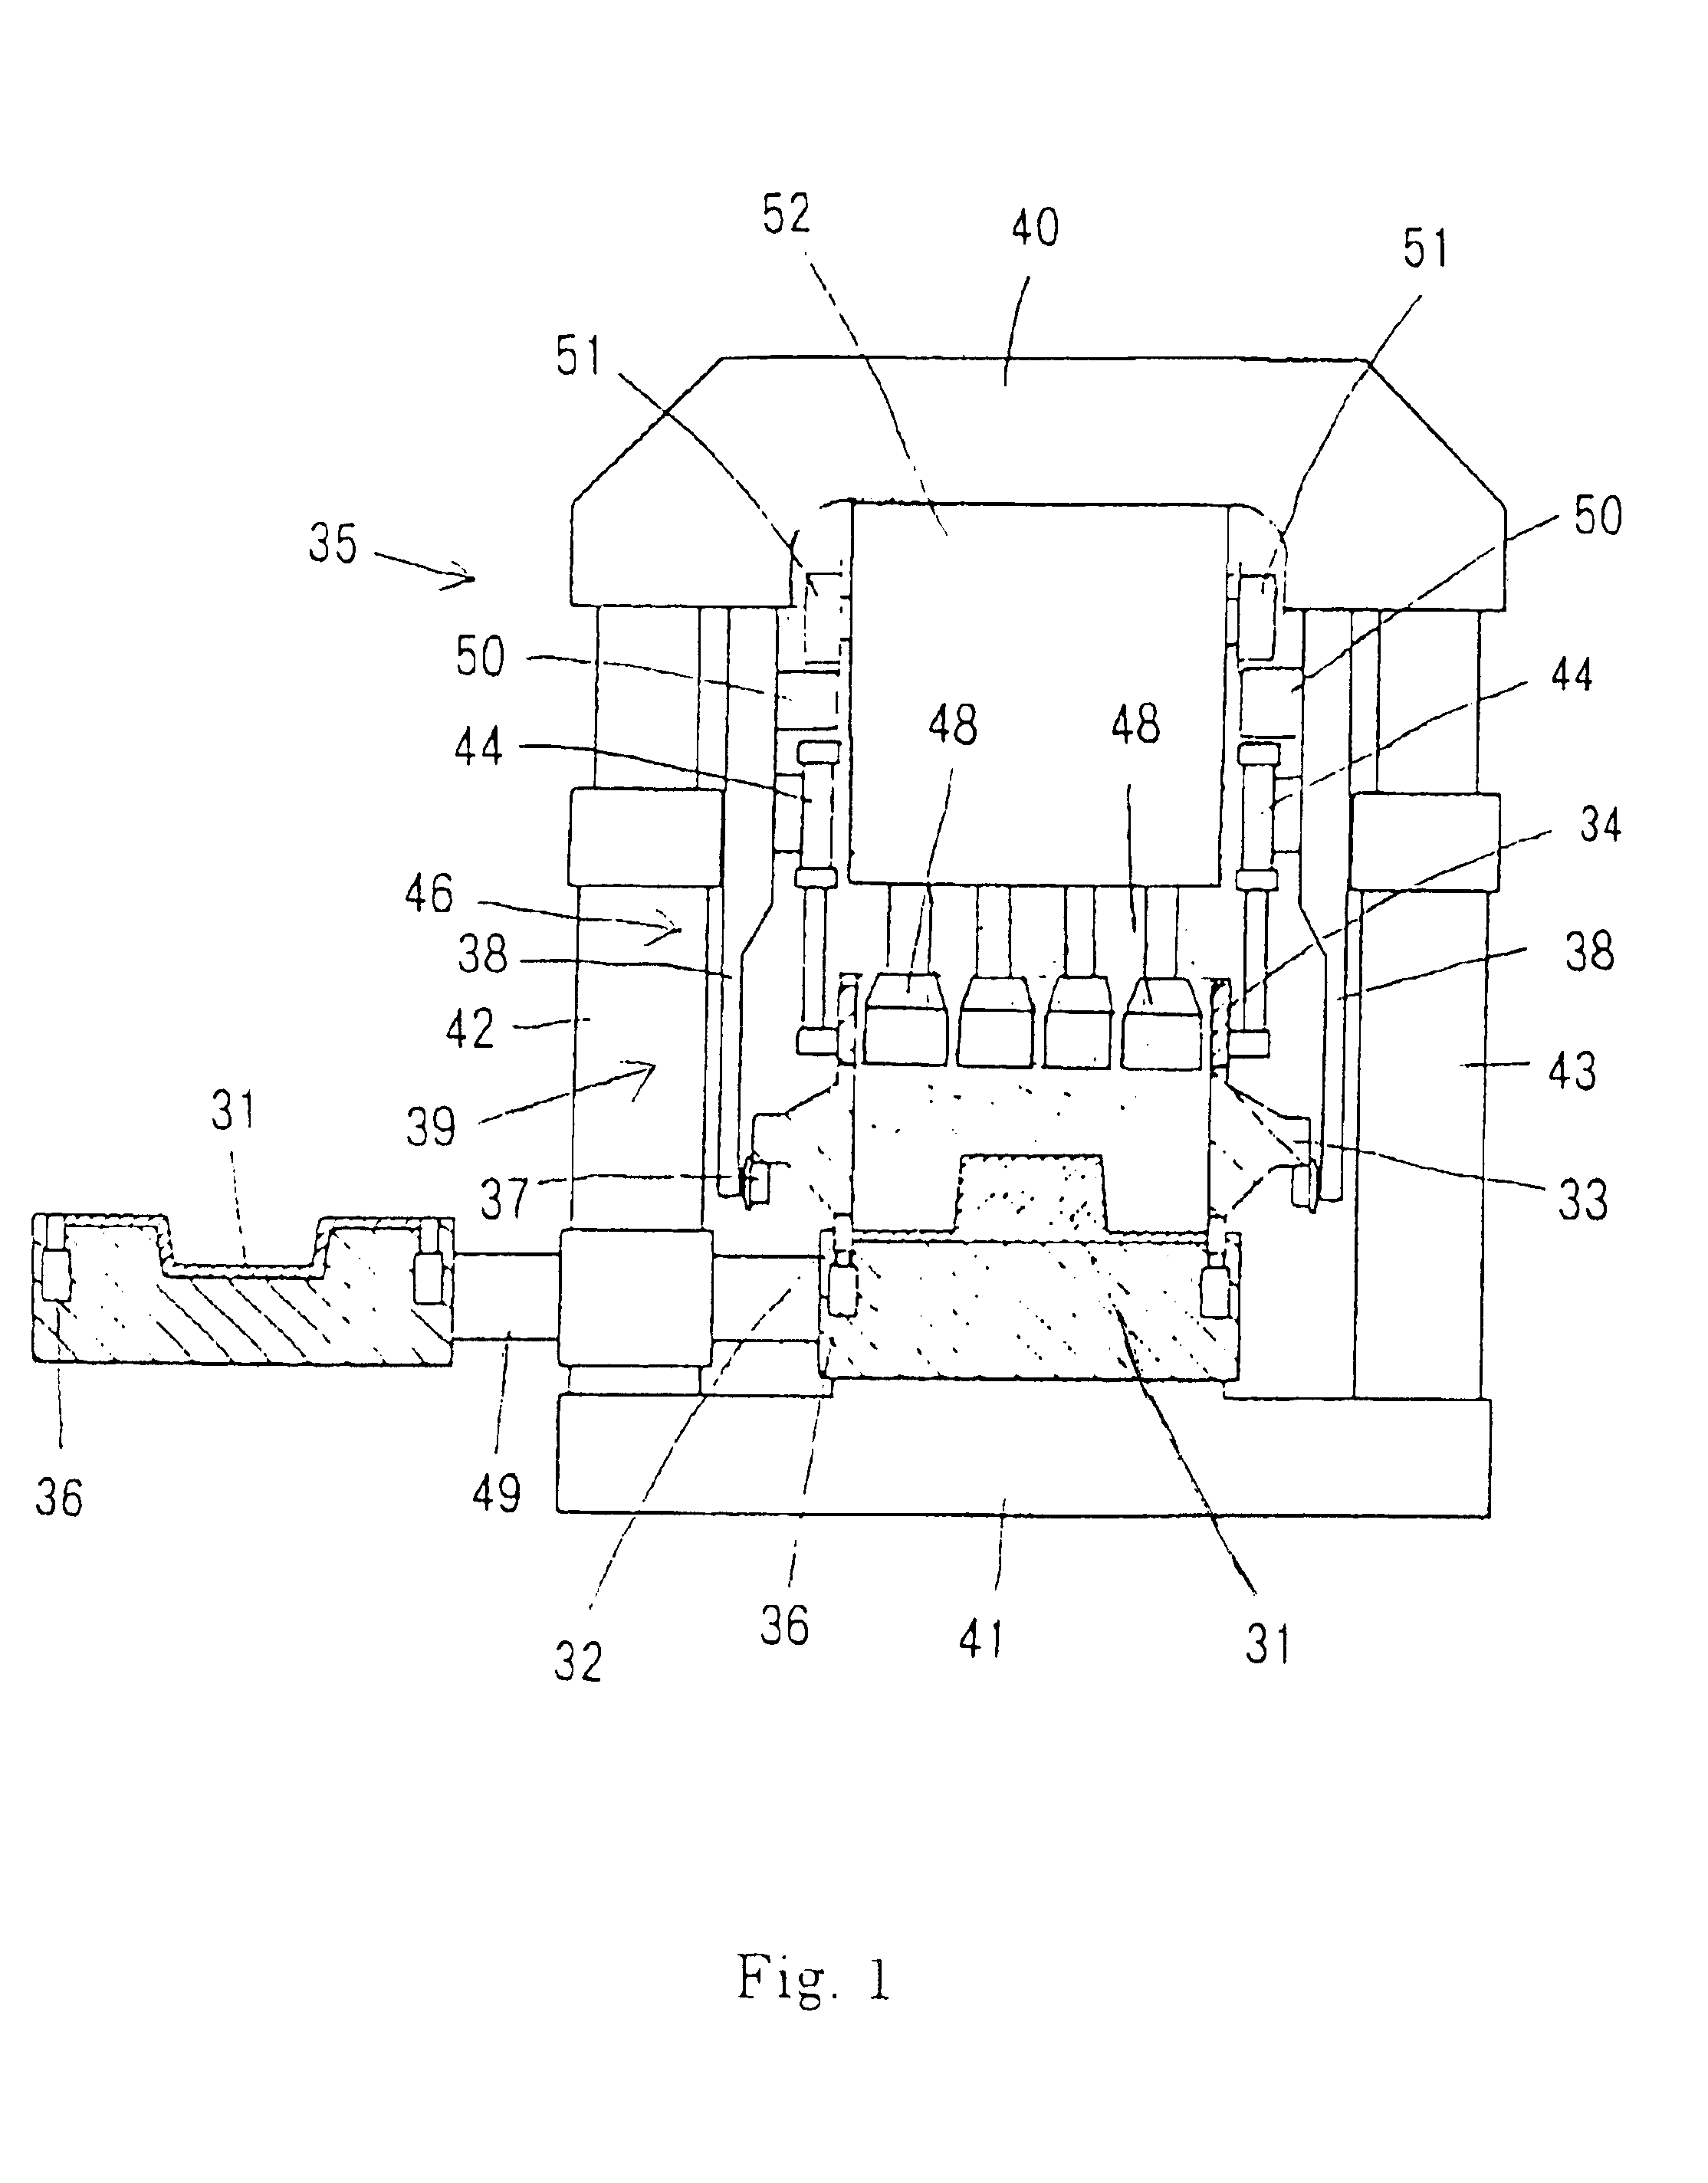 Die molding machine and pattern carrier